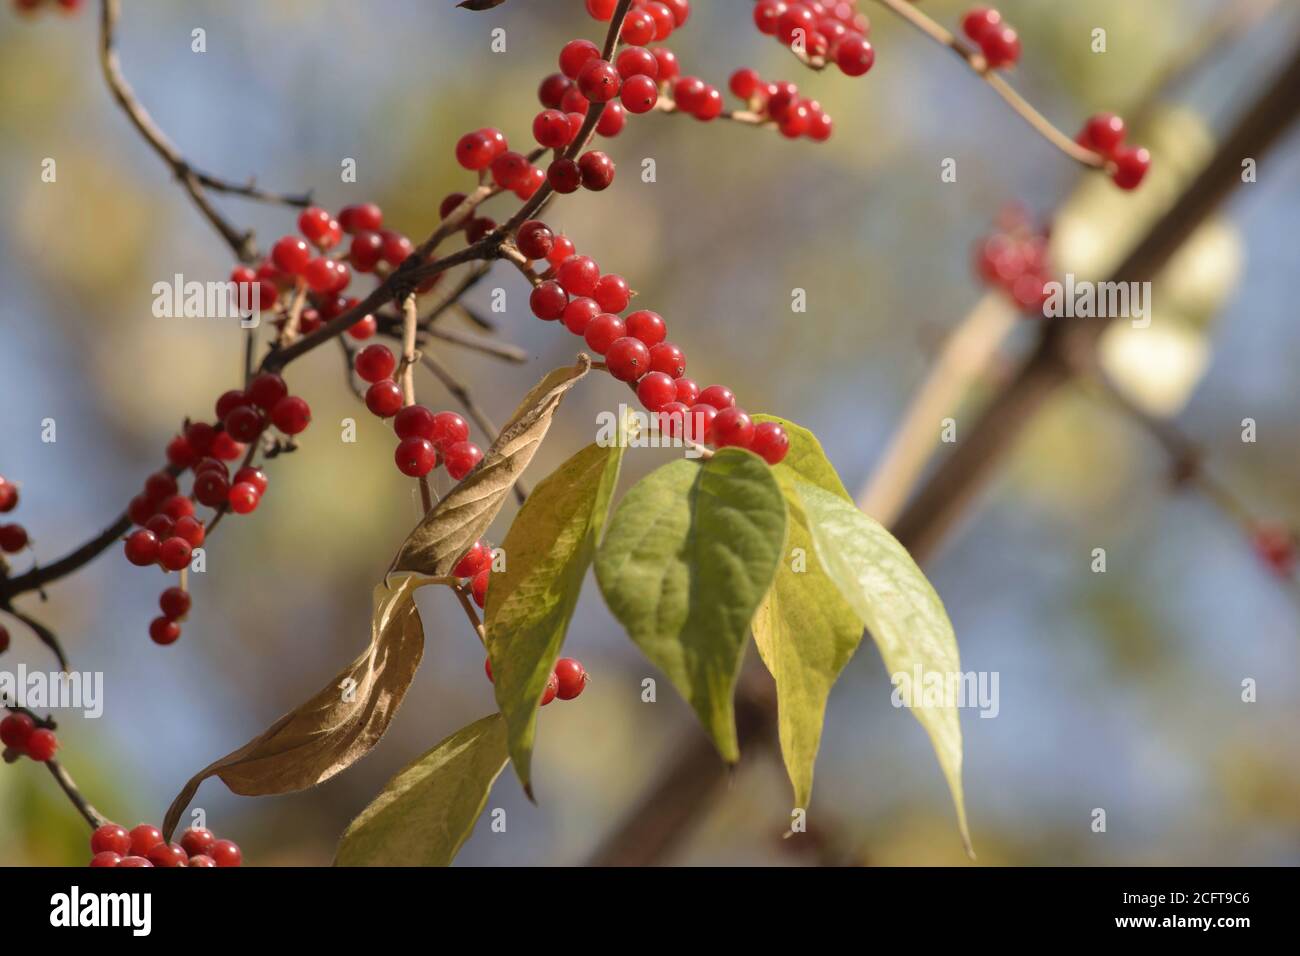 Red berries in autumn Lonicera xylosteum or Dwarf Honeysuckle or European Fly Honeysuckle Stock Photo